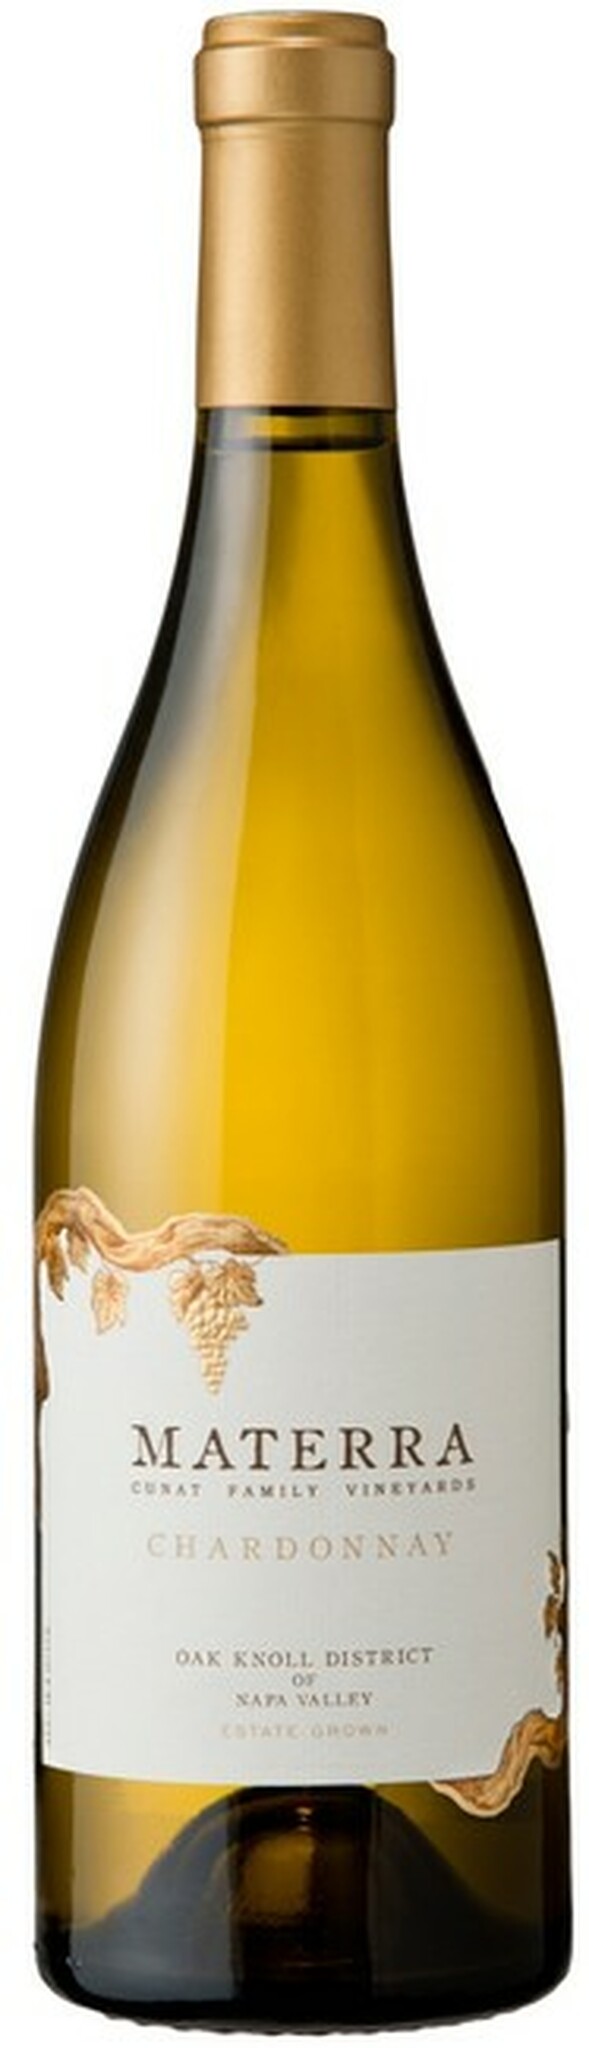 Product Image for Materra Chardonnay